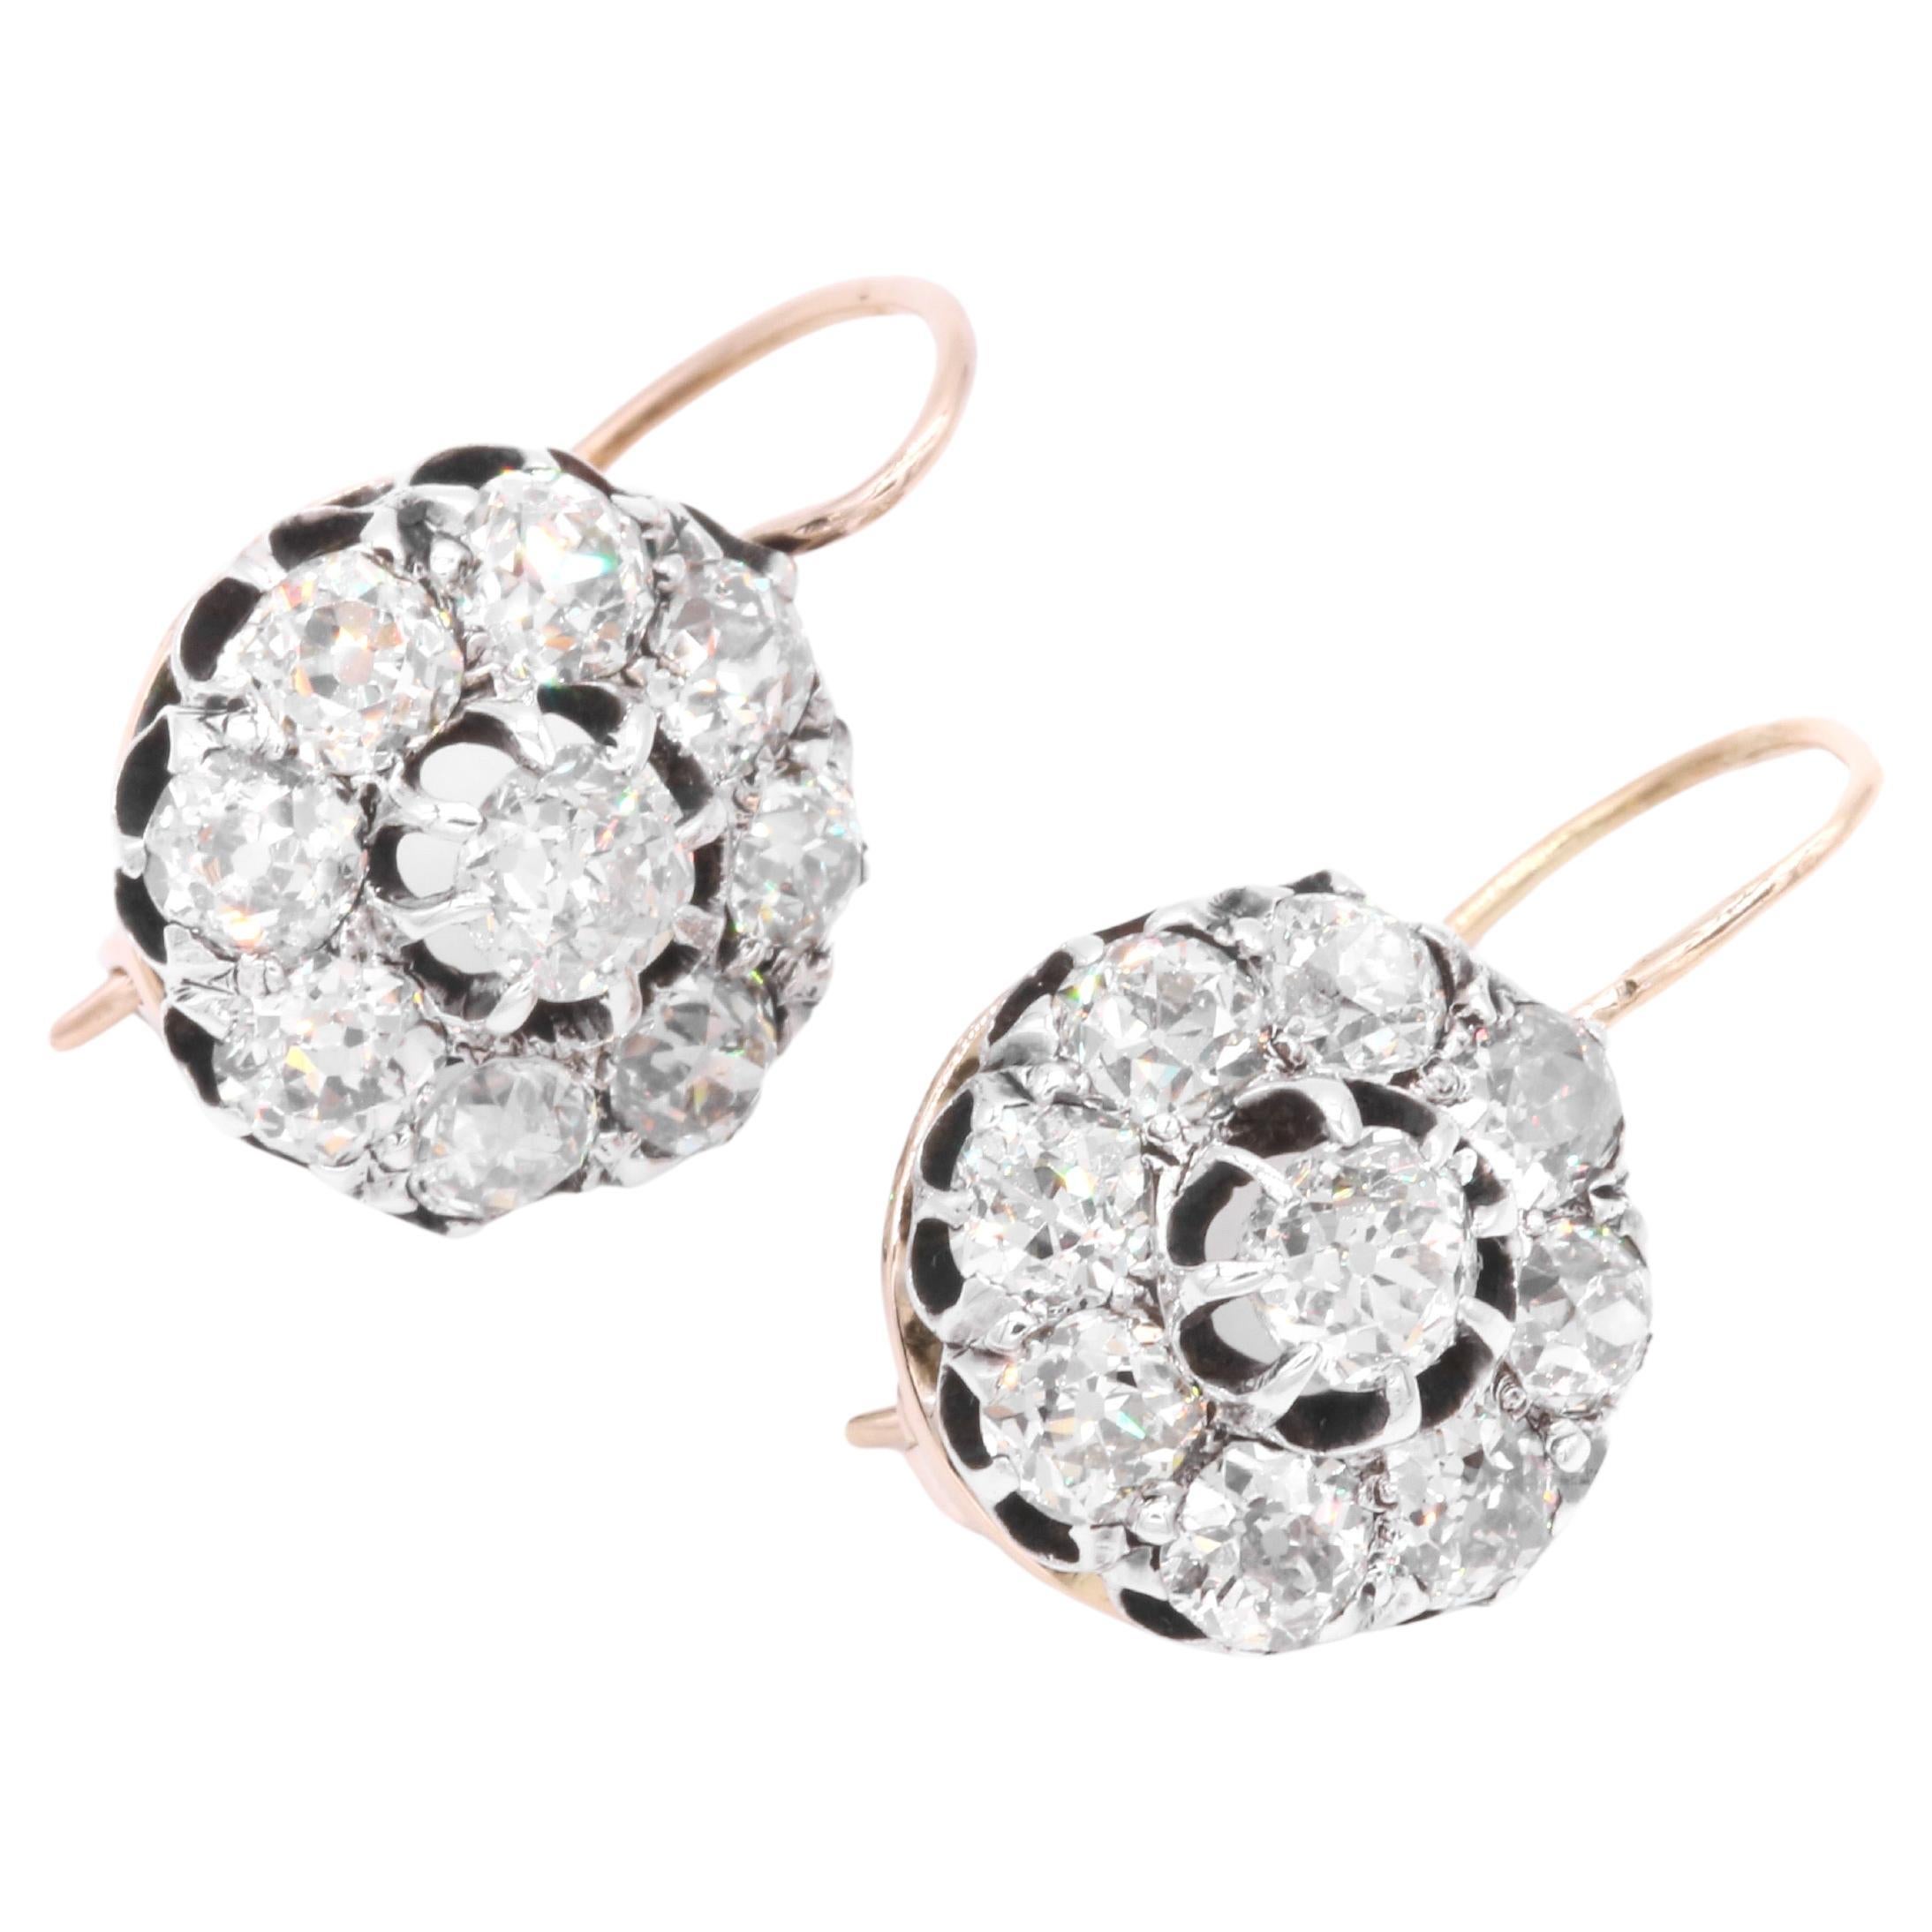 Antique Victorian 18K Gold & Silver 4.67ctw Old Cut Diamond Cluster Earrings For Sale